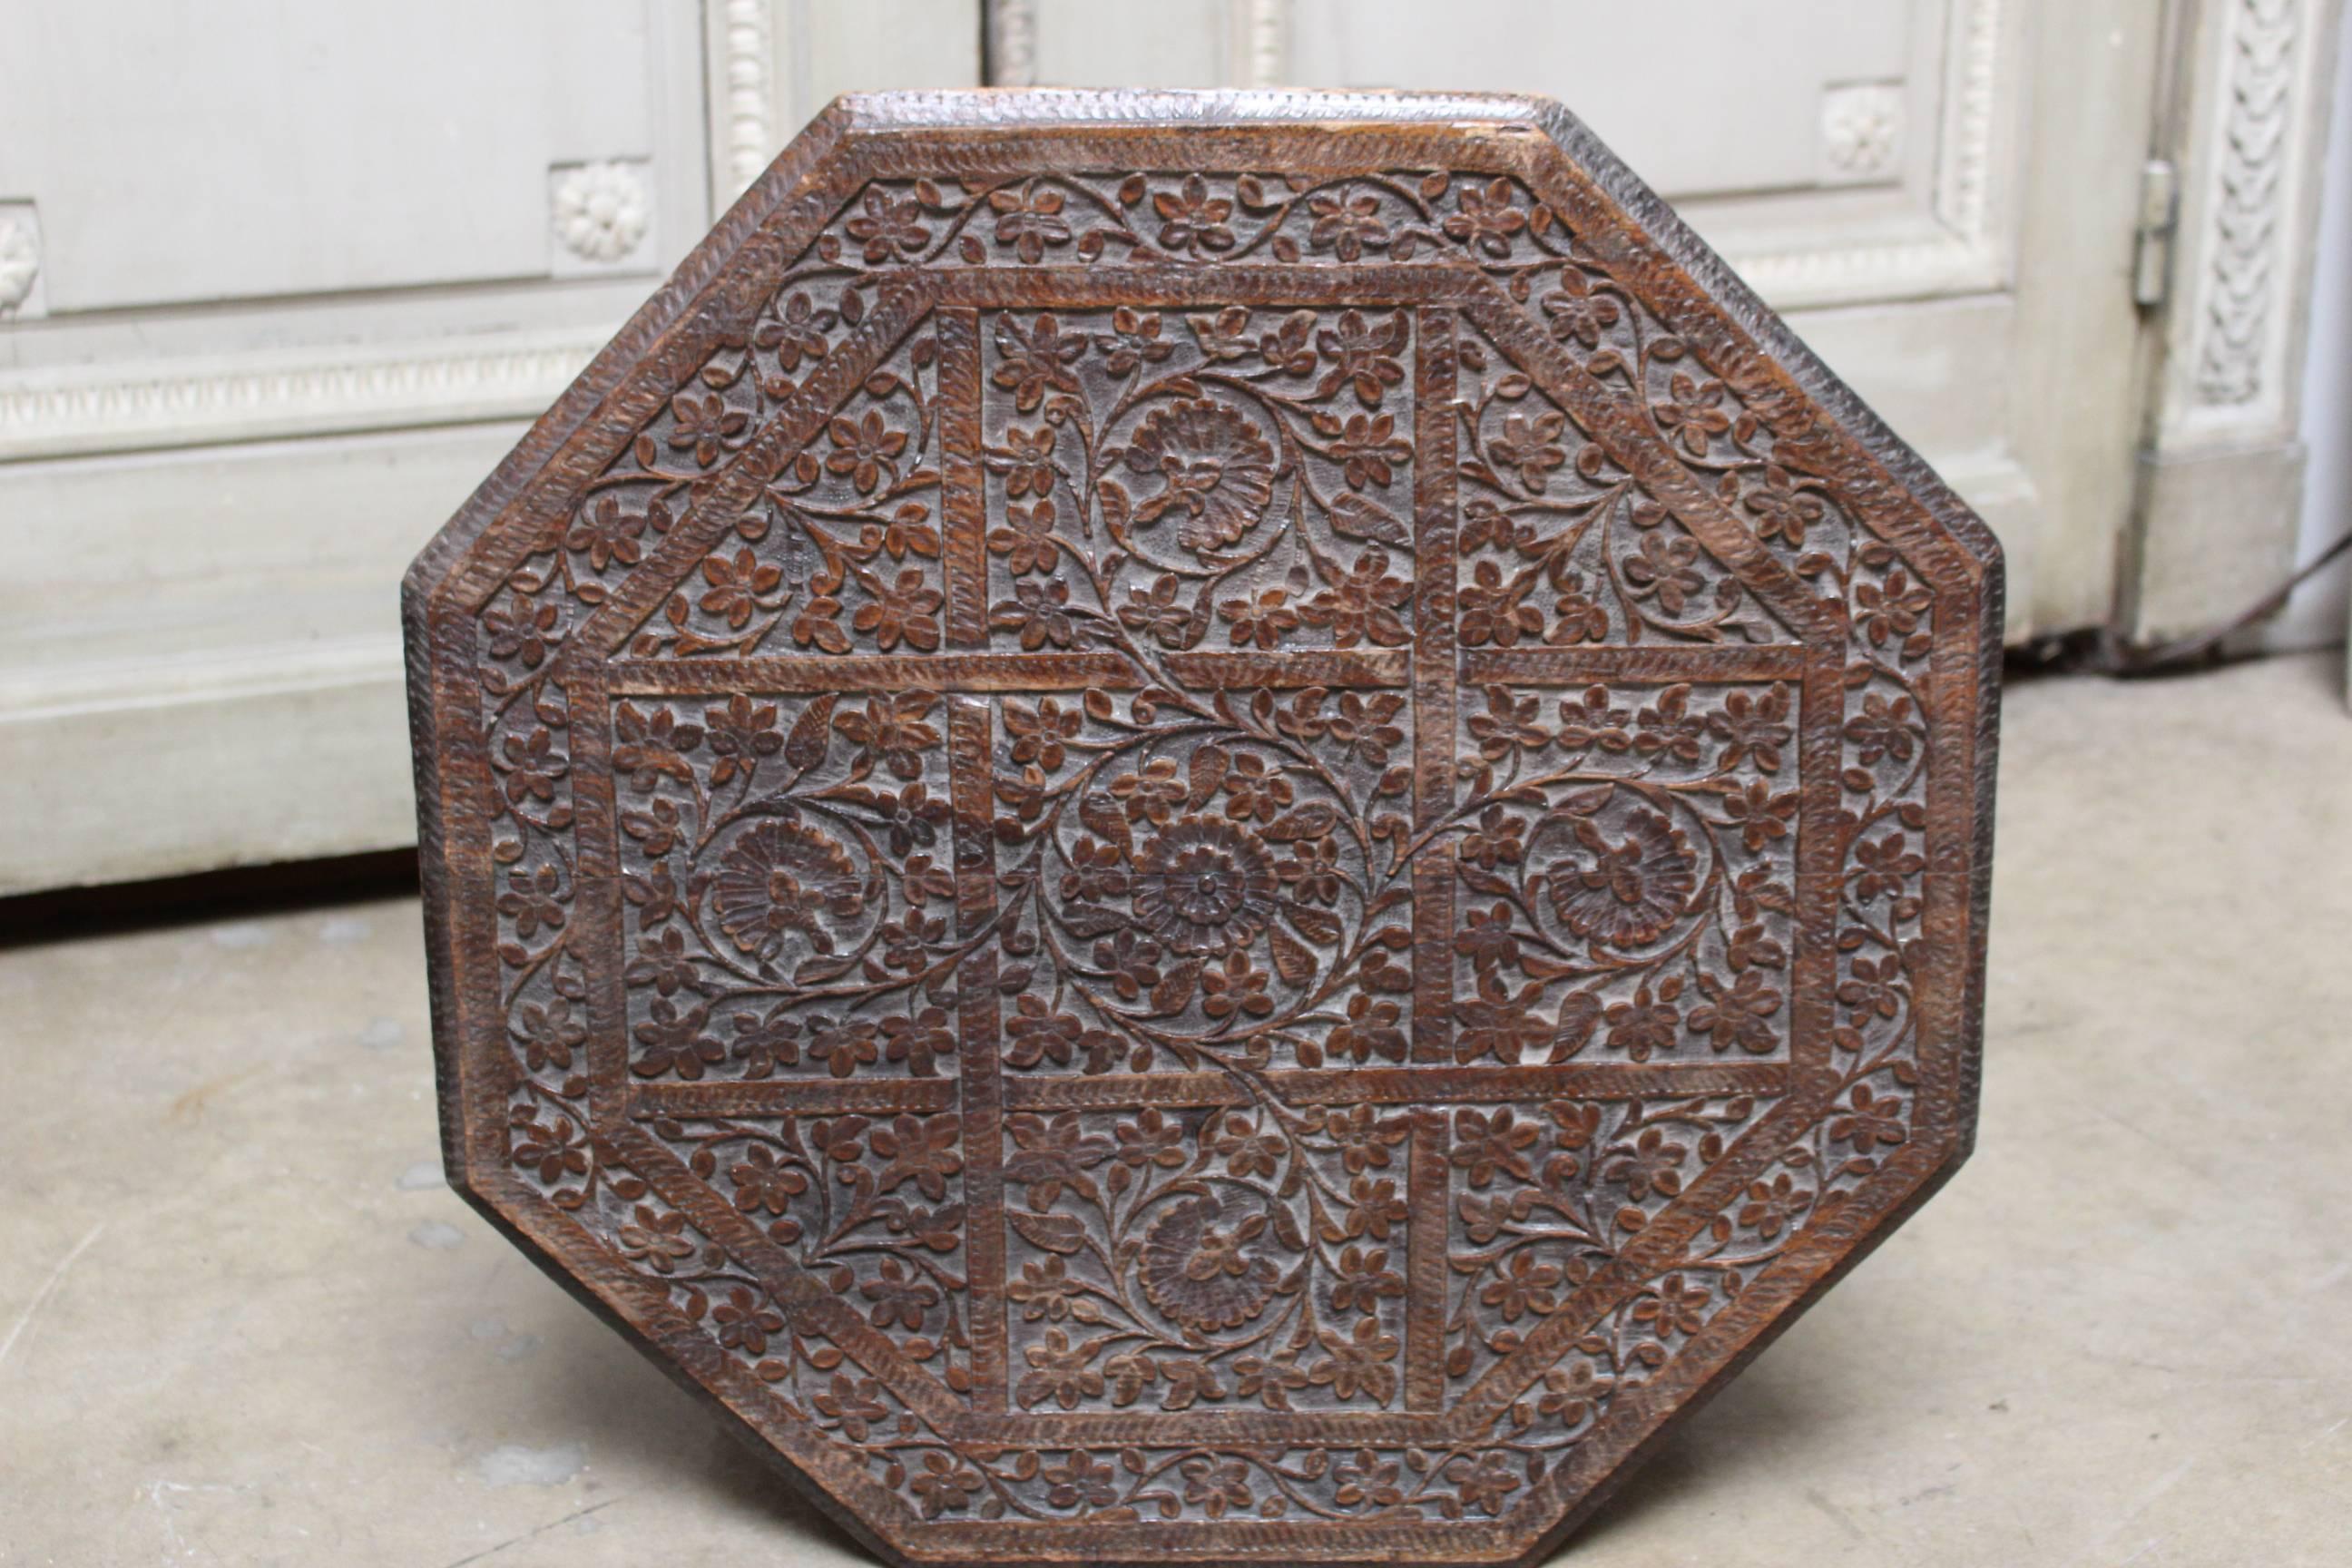 A Syrian carved wood table.